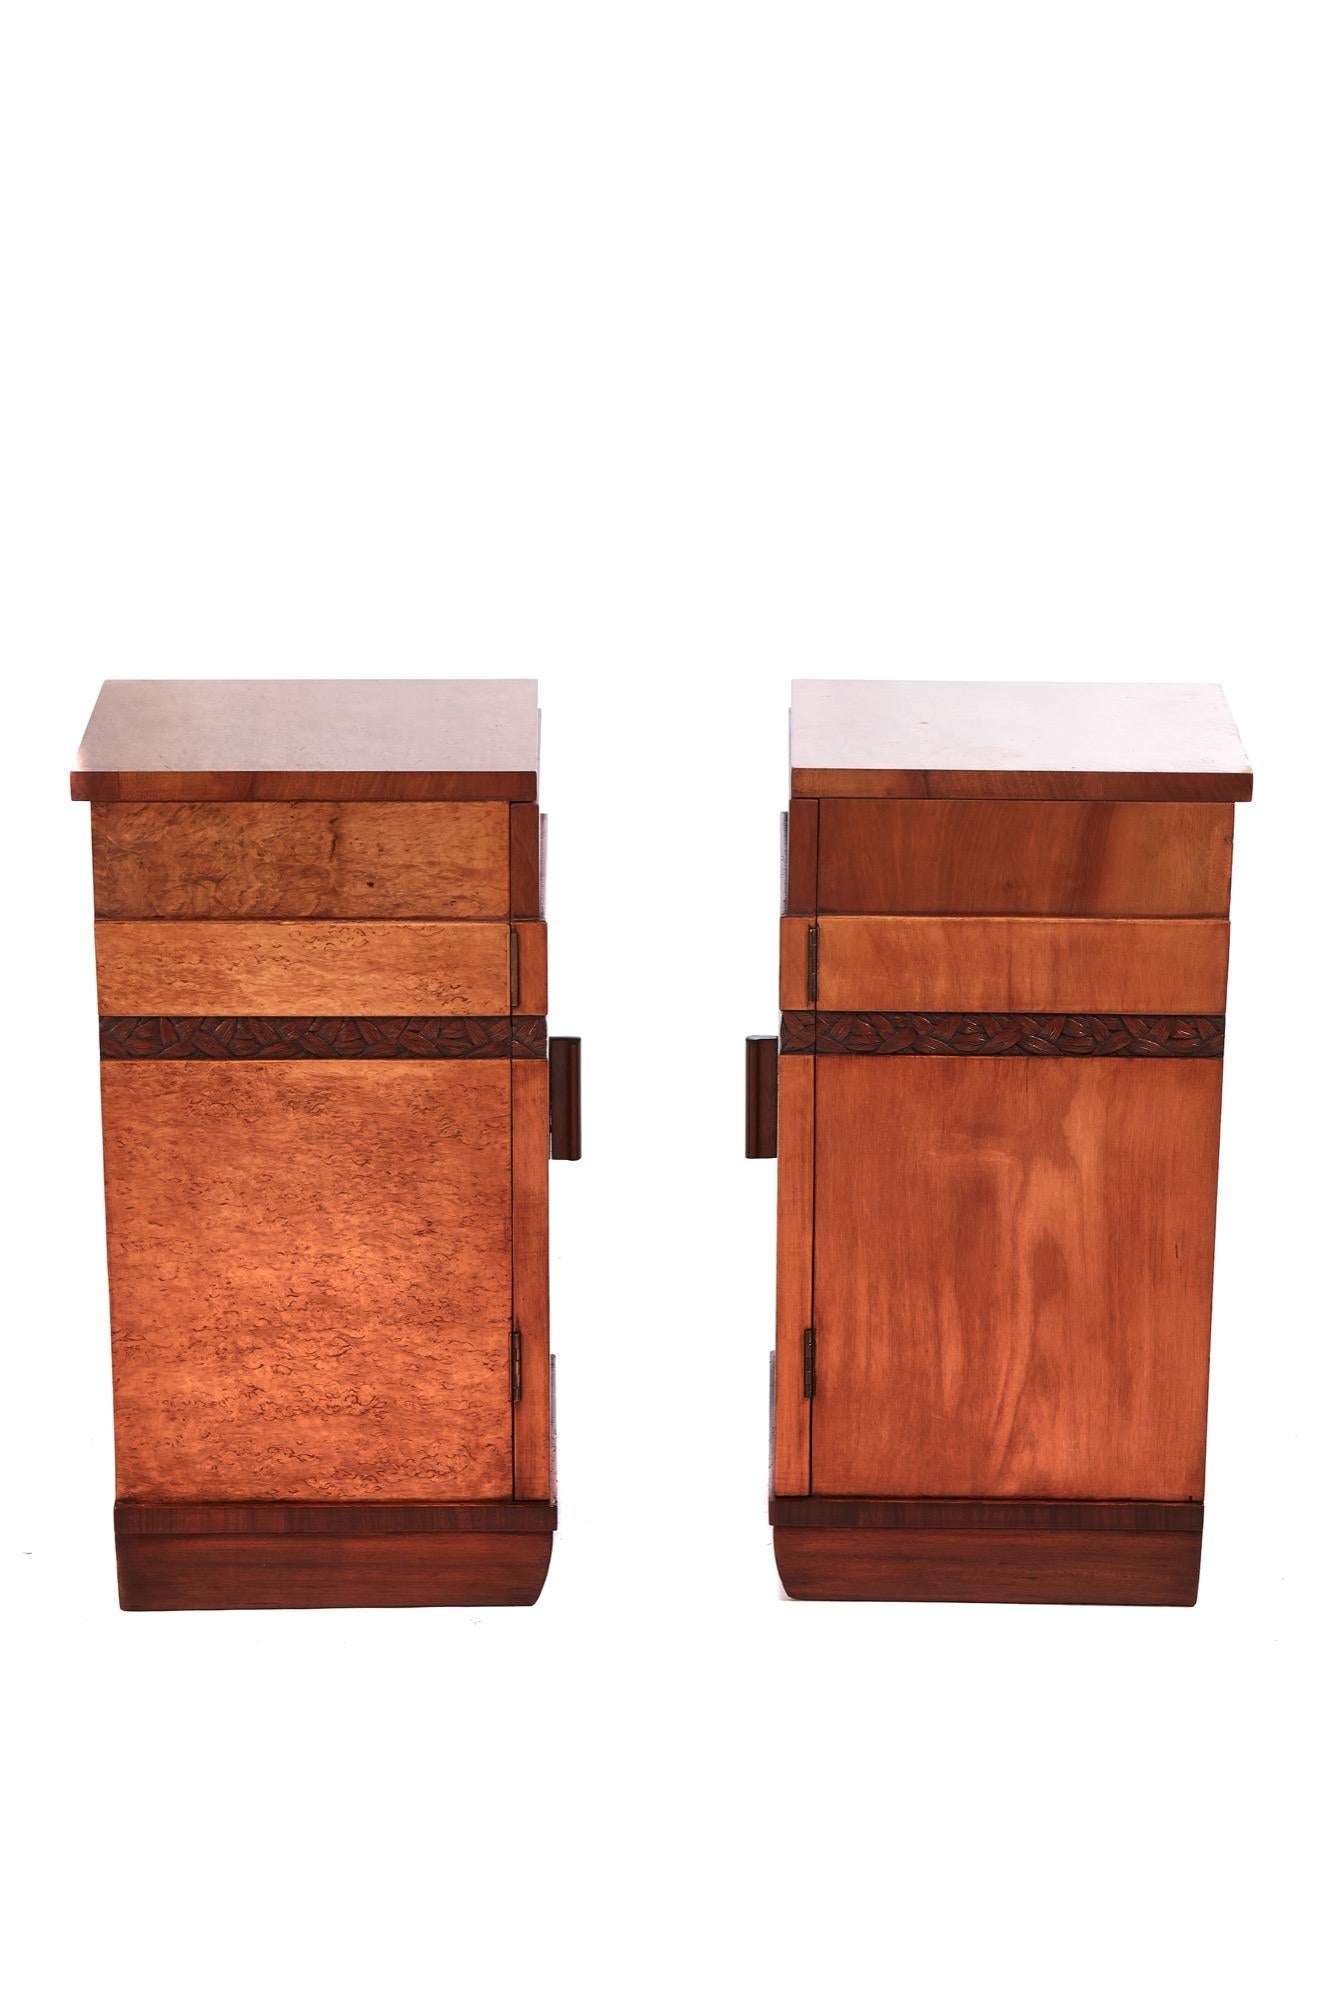 European Quality Pair of Art Deco Bird’s-Eye Maple Bedside Cabinets